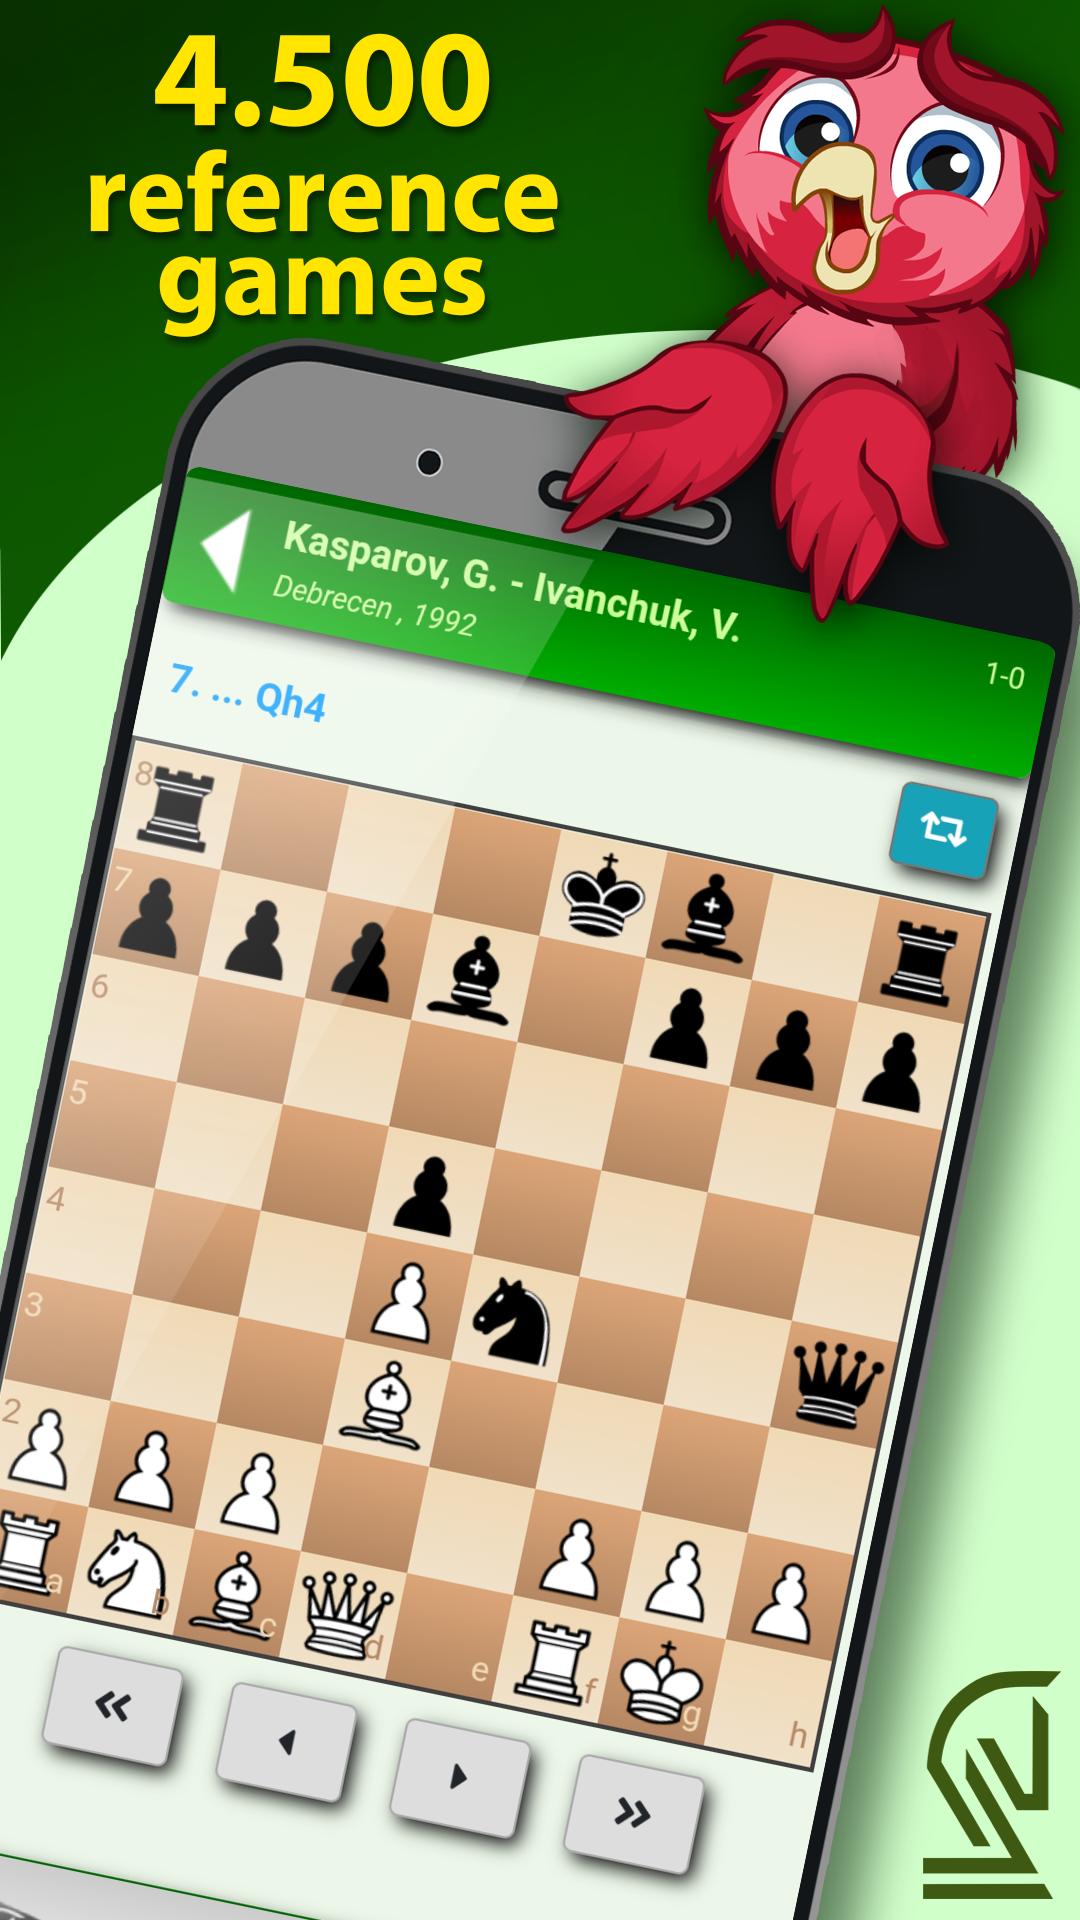 Chess Openings Pró-Master for PC / Mac / Windows 7.8.10 - Free